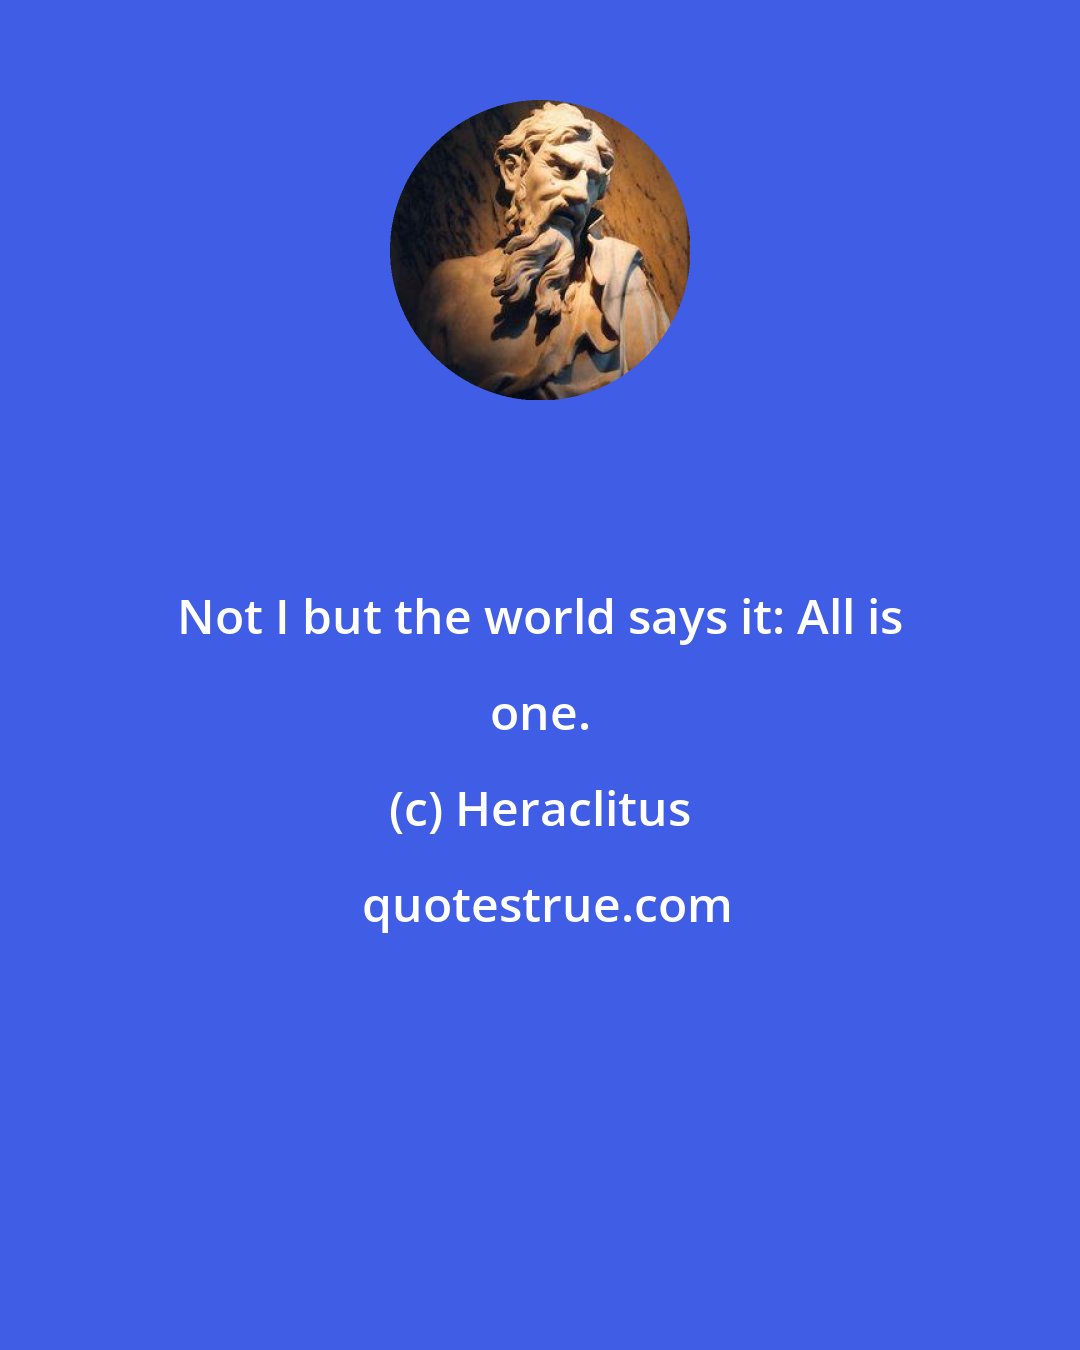 Heraclitus: Not I but the world says it: All is one.